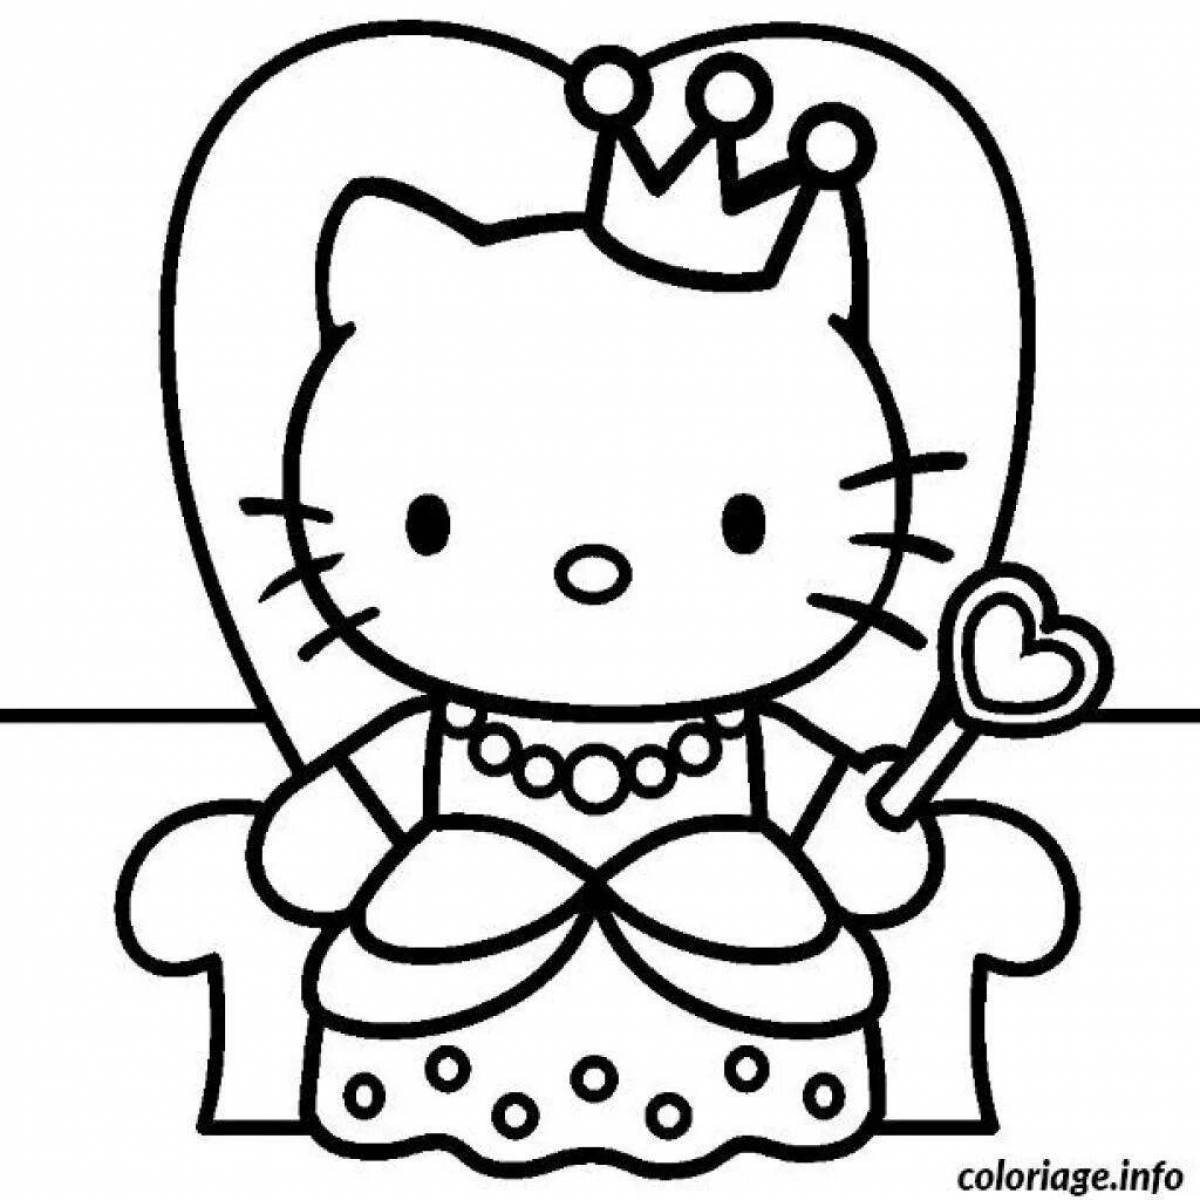 Coloring page holiday aster kitty